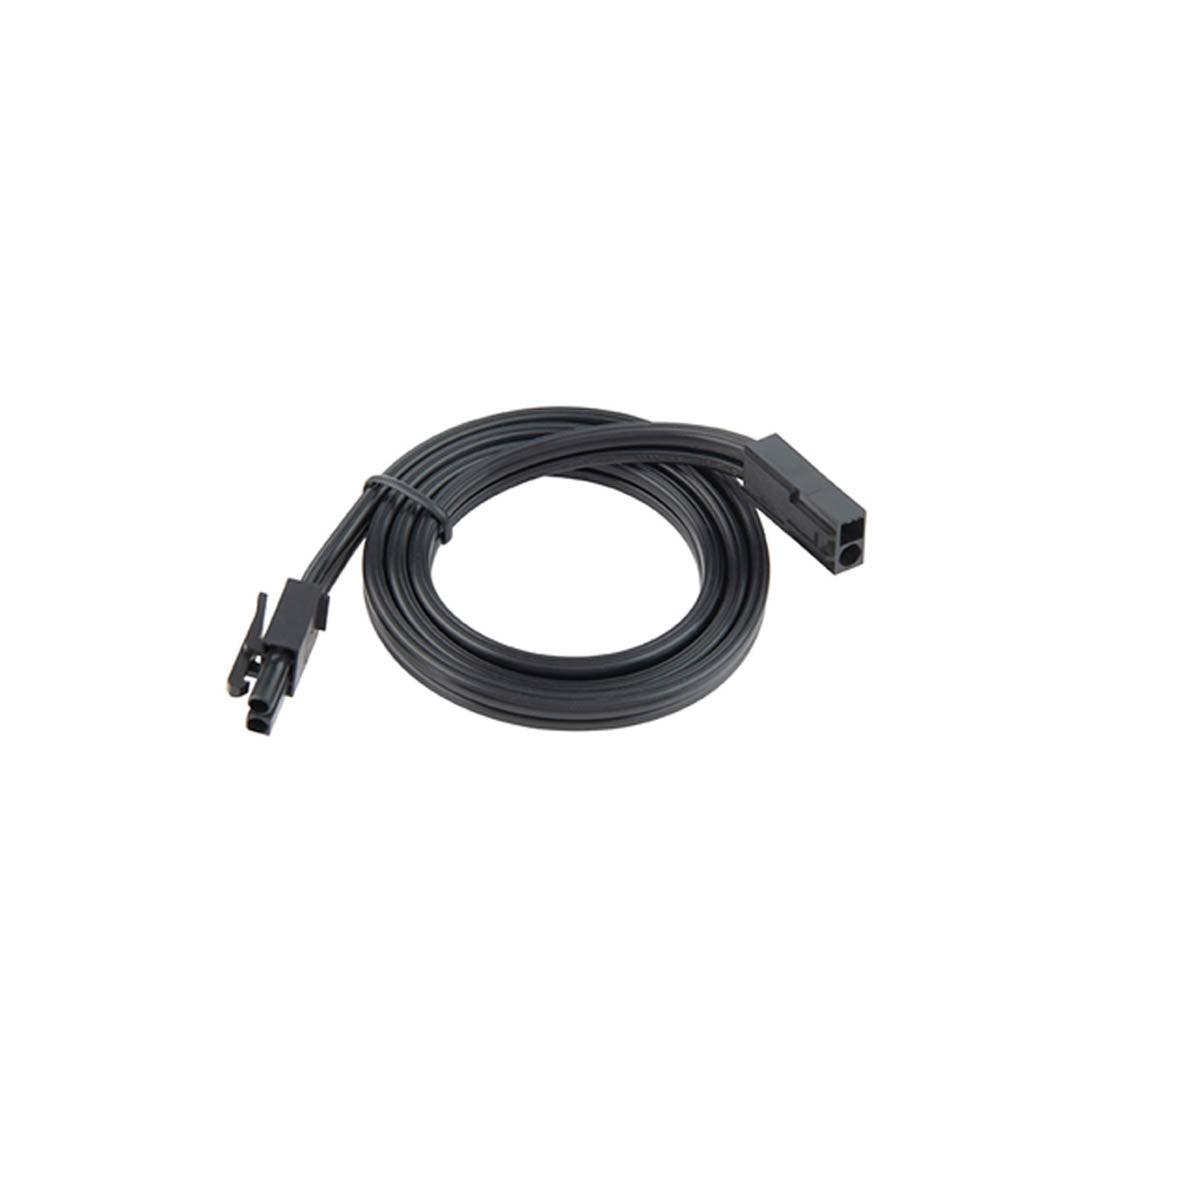 24in. Interconnect Cable for 3-CCT Puck Light, Black